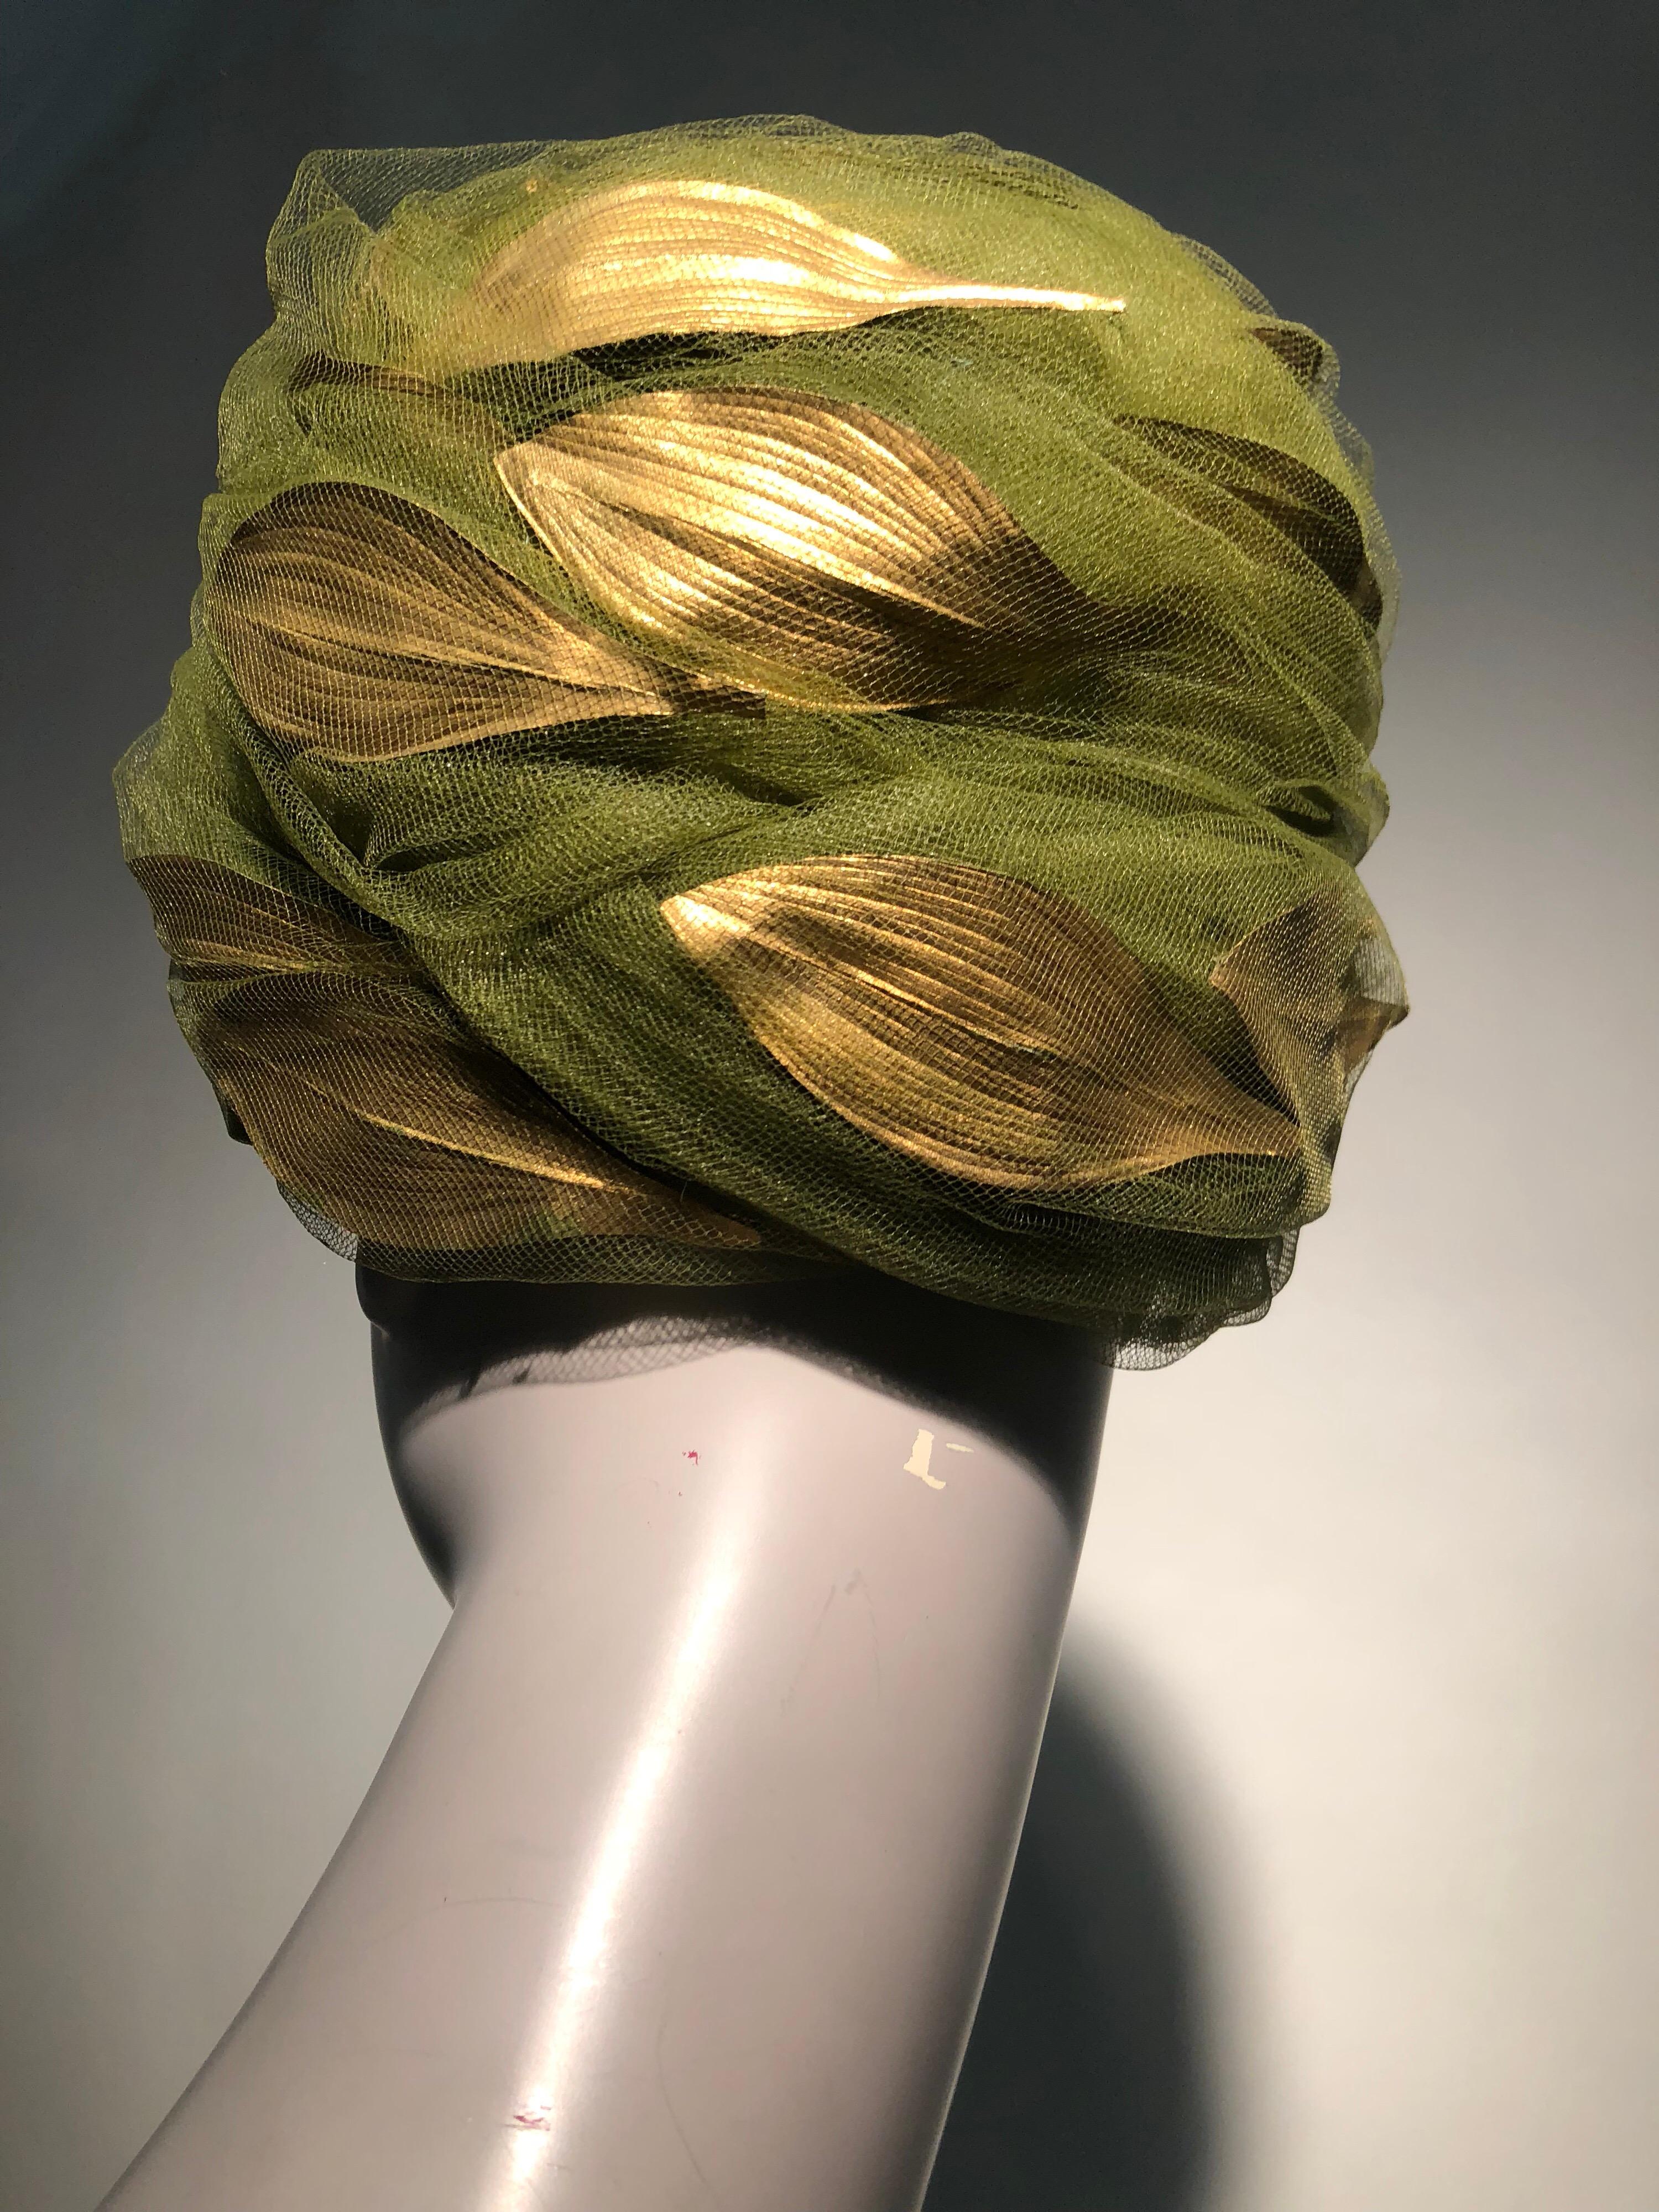 A stunning 1960s Christian Dior beehive-style turban of olive green tulle veiling gold leaves and berries. A harder-to-find medium to large size, this is a very stylish and wearable hat! Intended to be worn slightly back on the head at the crown.  